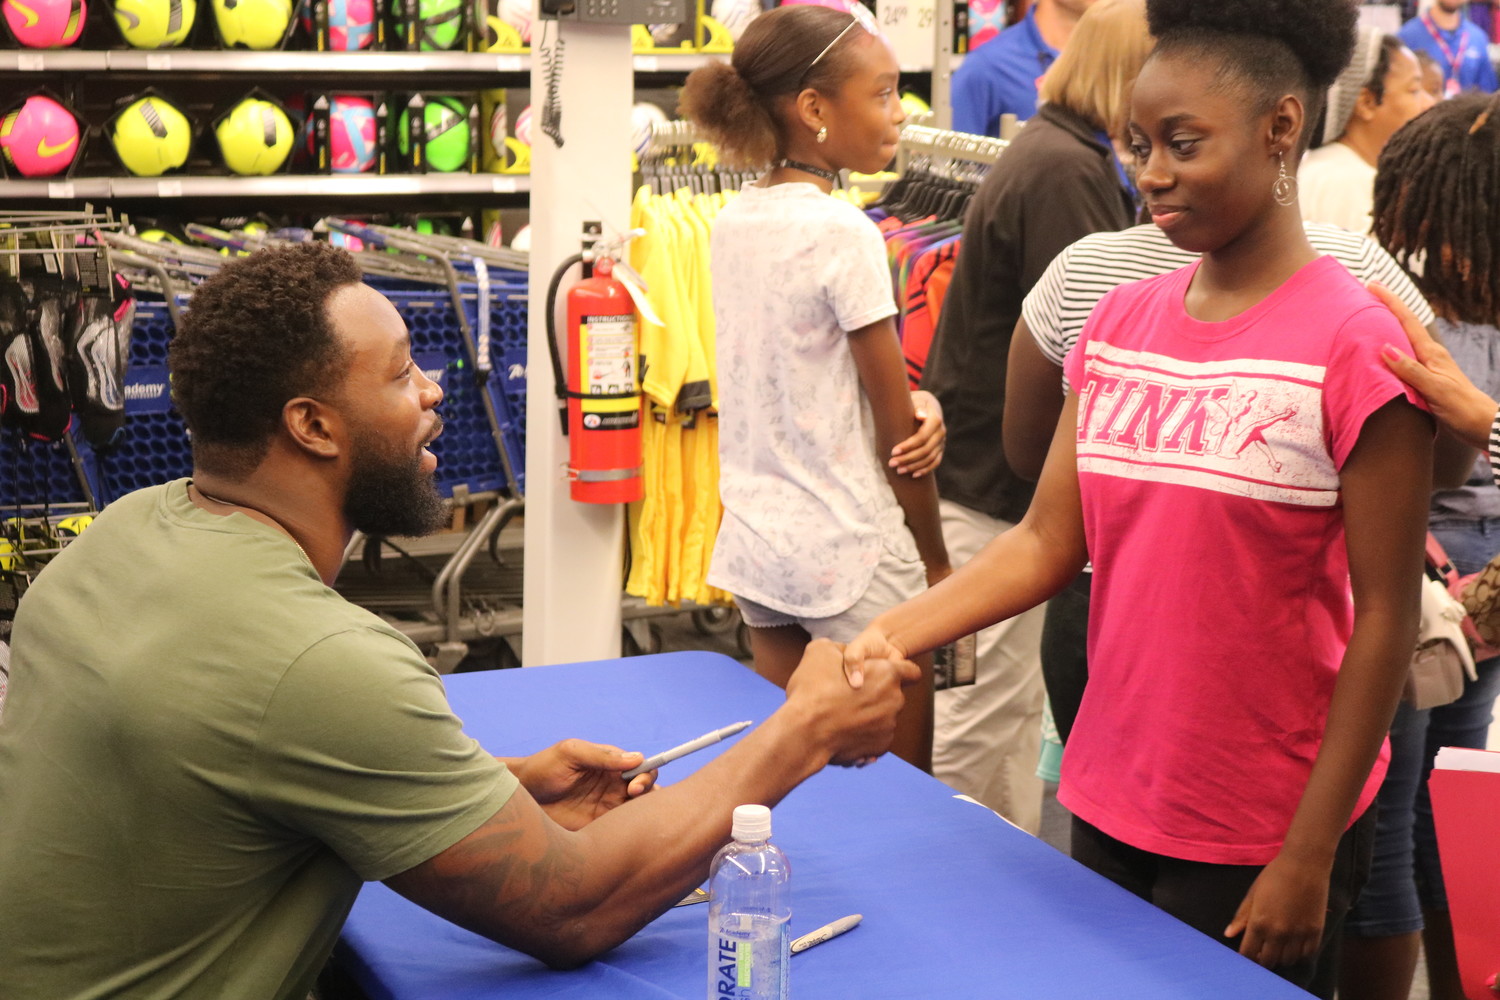 Jaguars linebacker Lerentee McCray signs autographs July 23 at a back-to-school event at Academy Sports + Outdoors for children from the Sulzbacker Village, a community for homeless women and children.